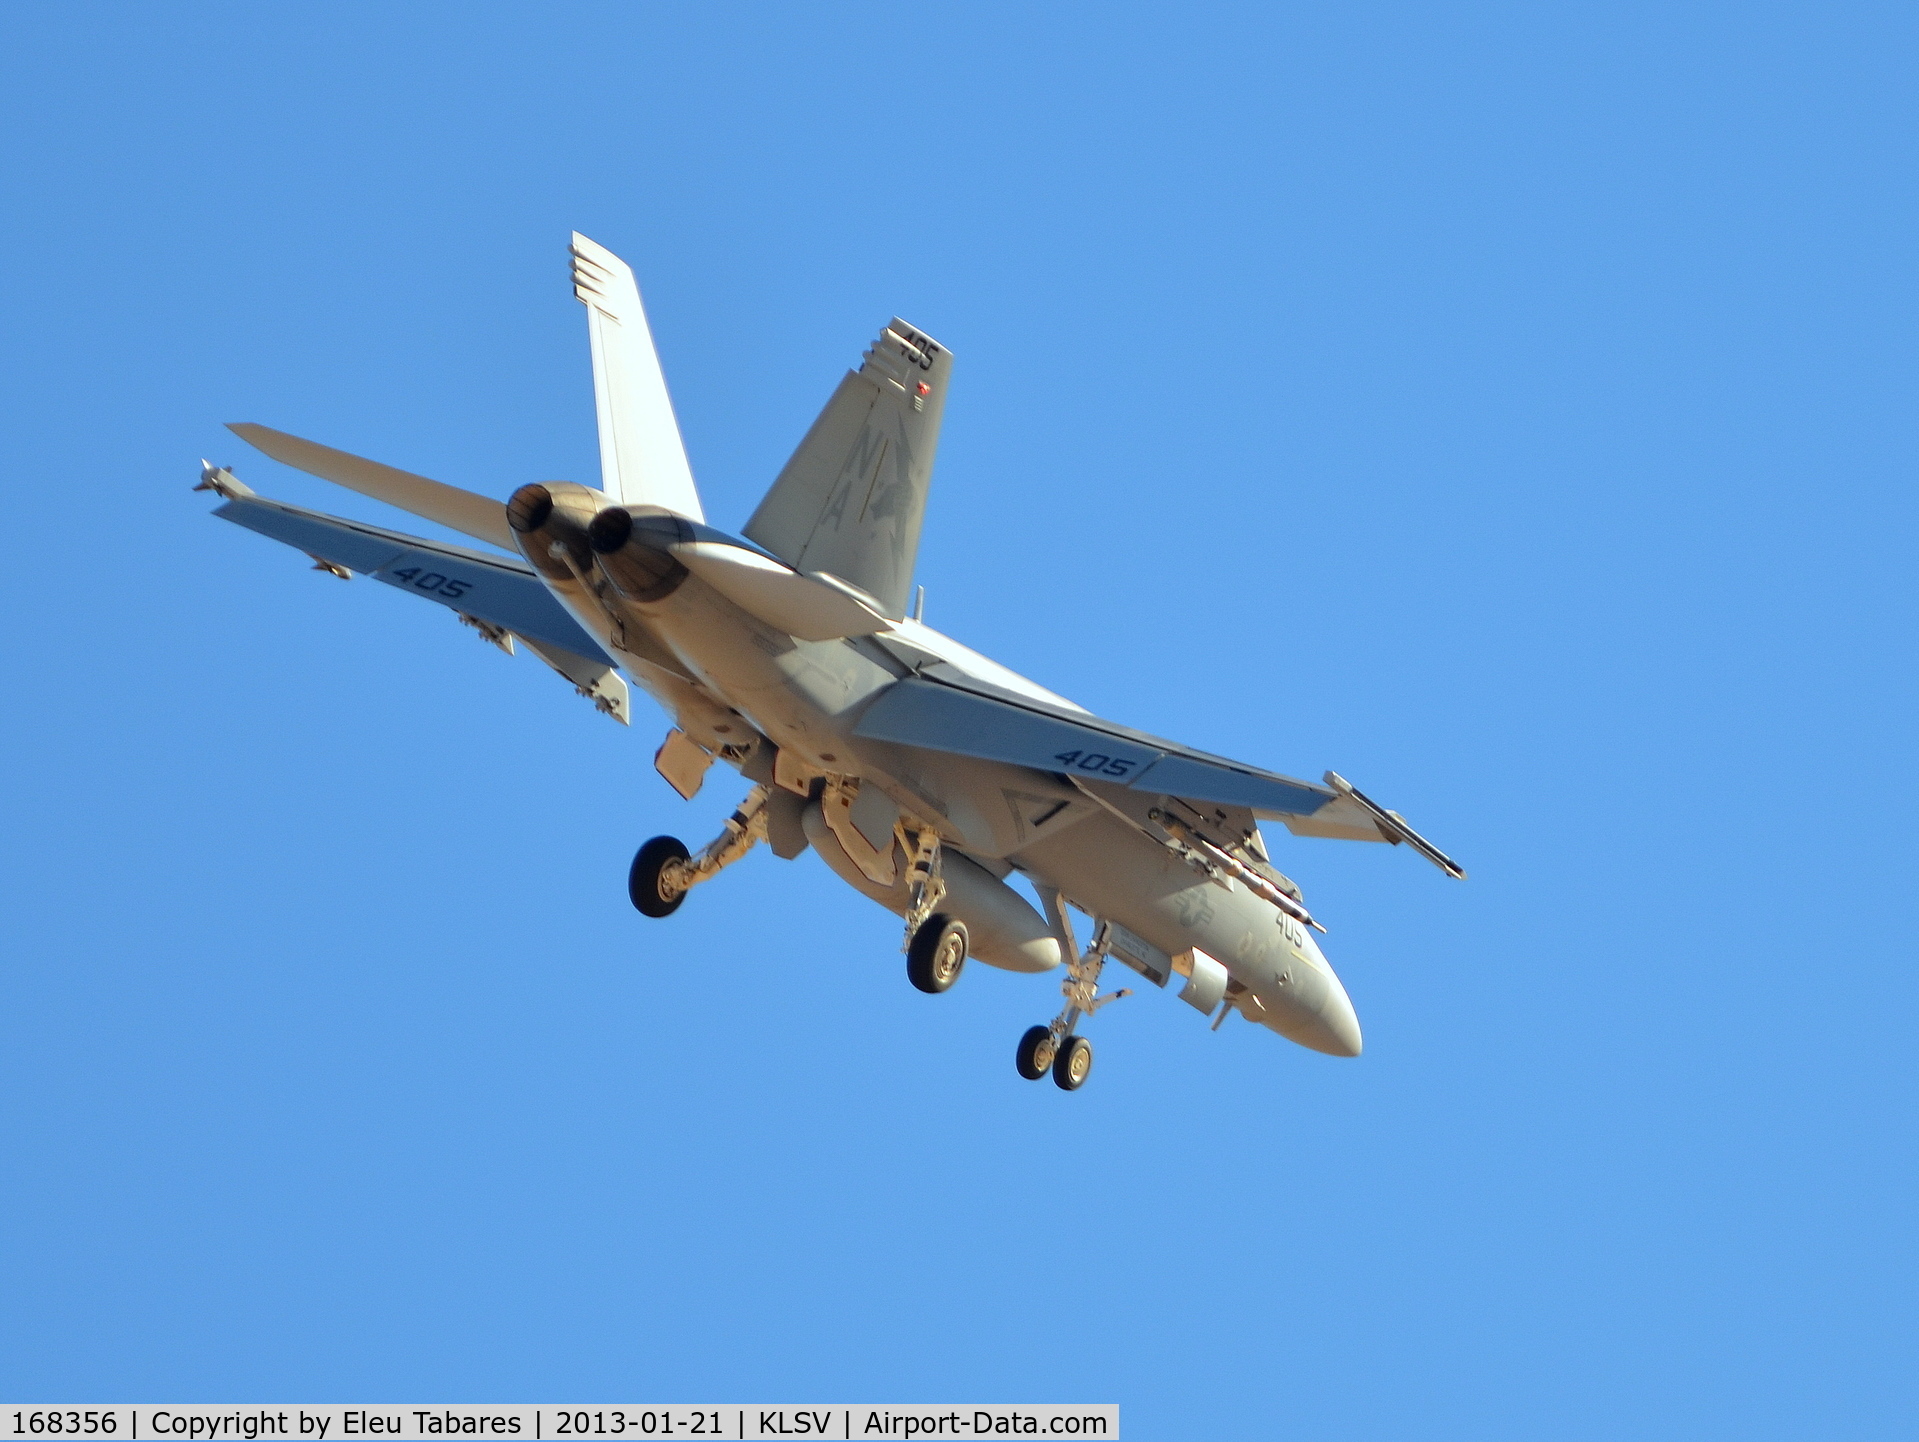 168356, Boeing F/A-18E Super Hornet C/N E-206, Taken during Red Flag Exercise at Nellis Air Force Base, Nevada.